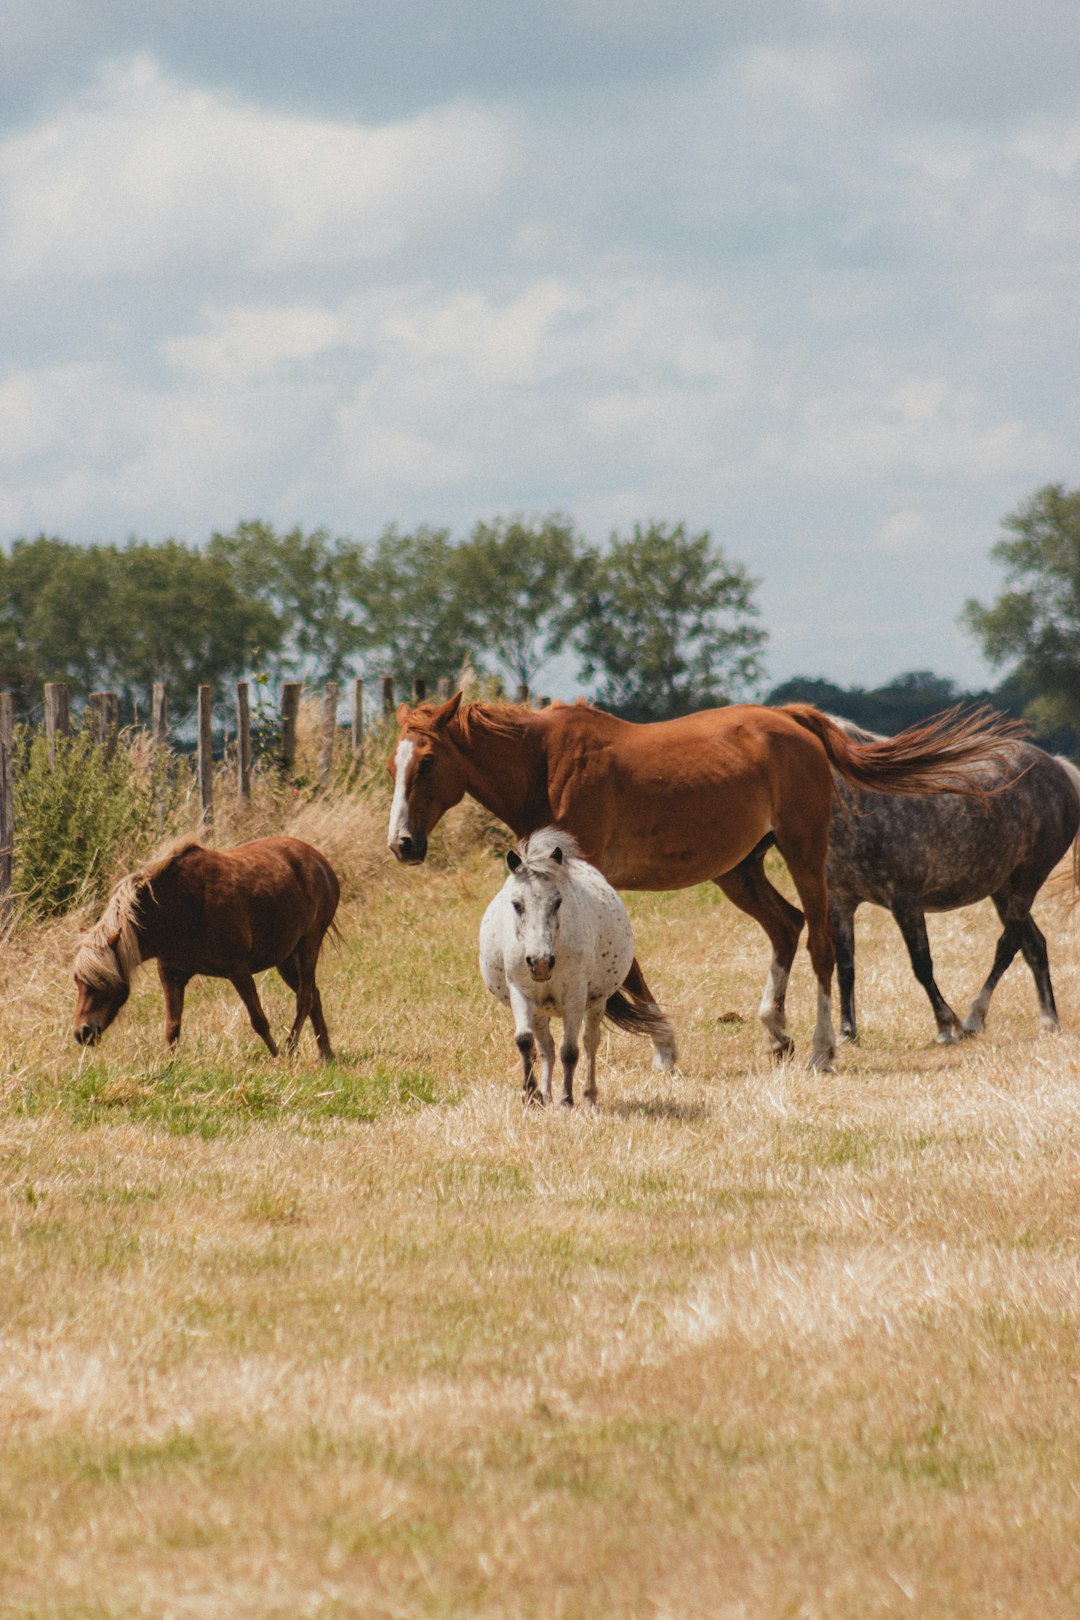 brown and white horses on green grass field during daytime